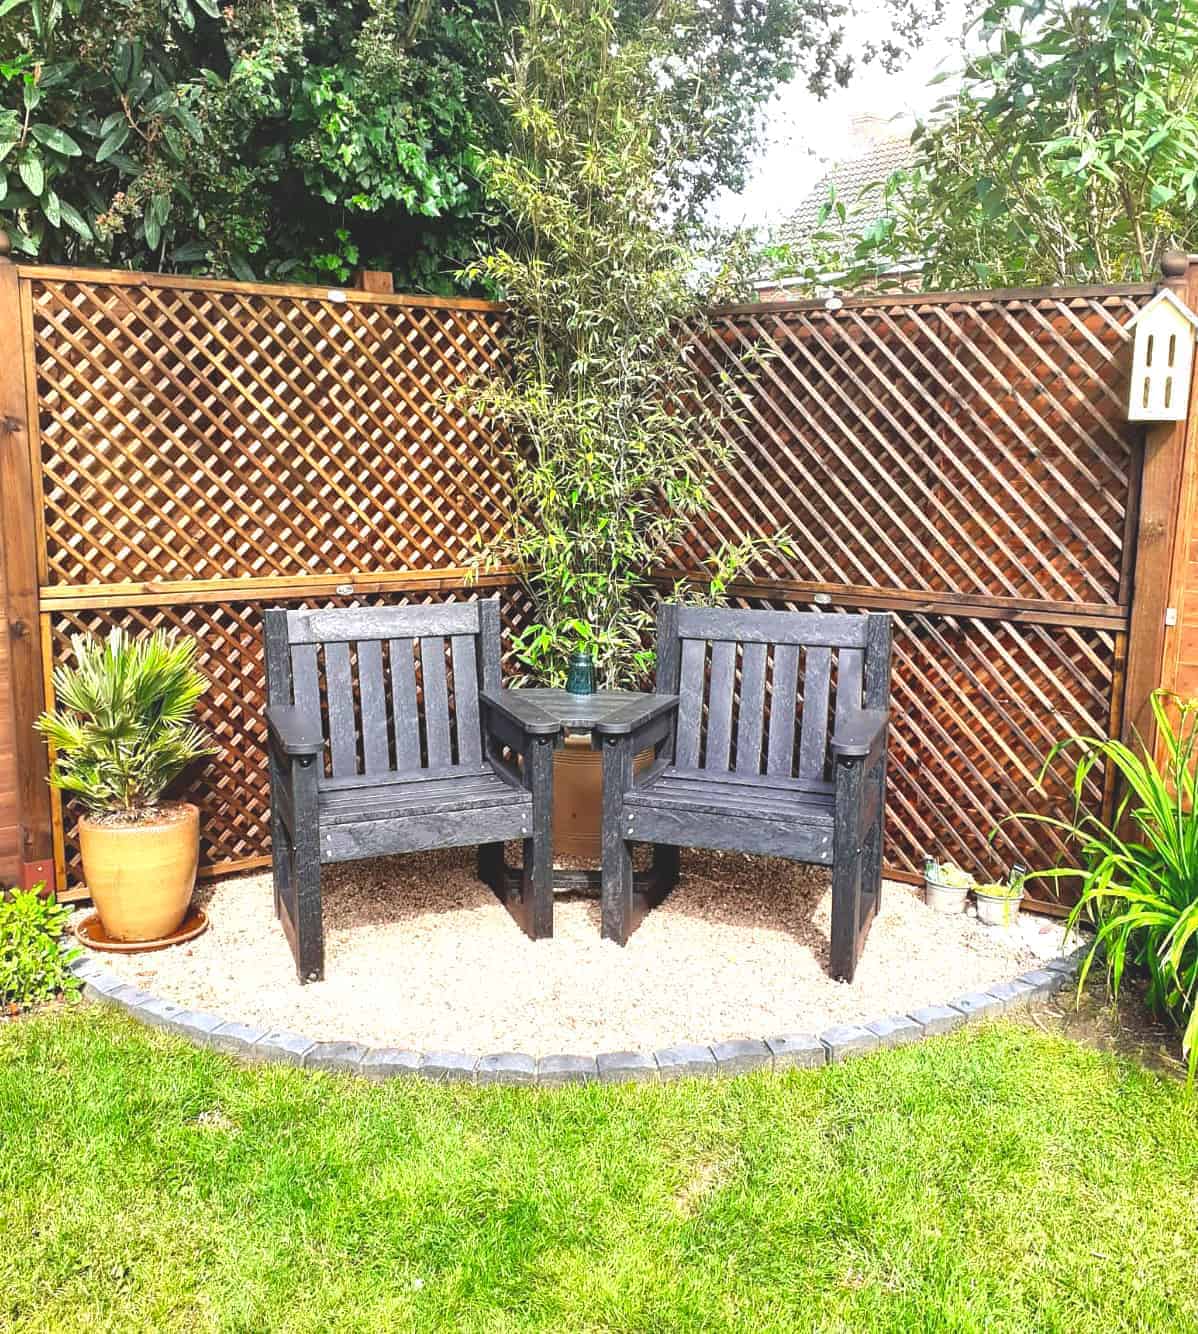 TDP Tea for Two Garden Furniture made from recycled plastic